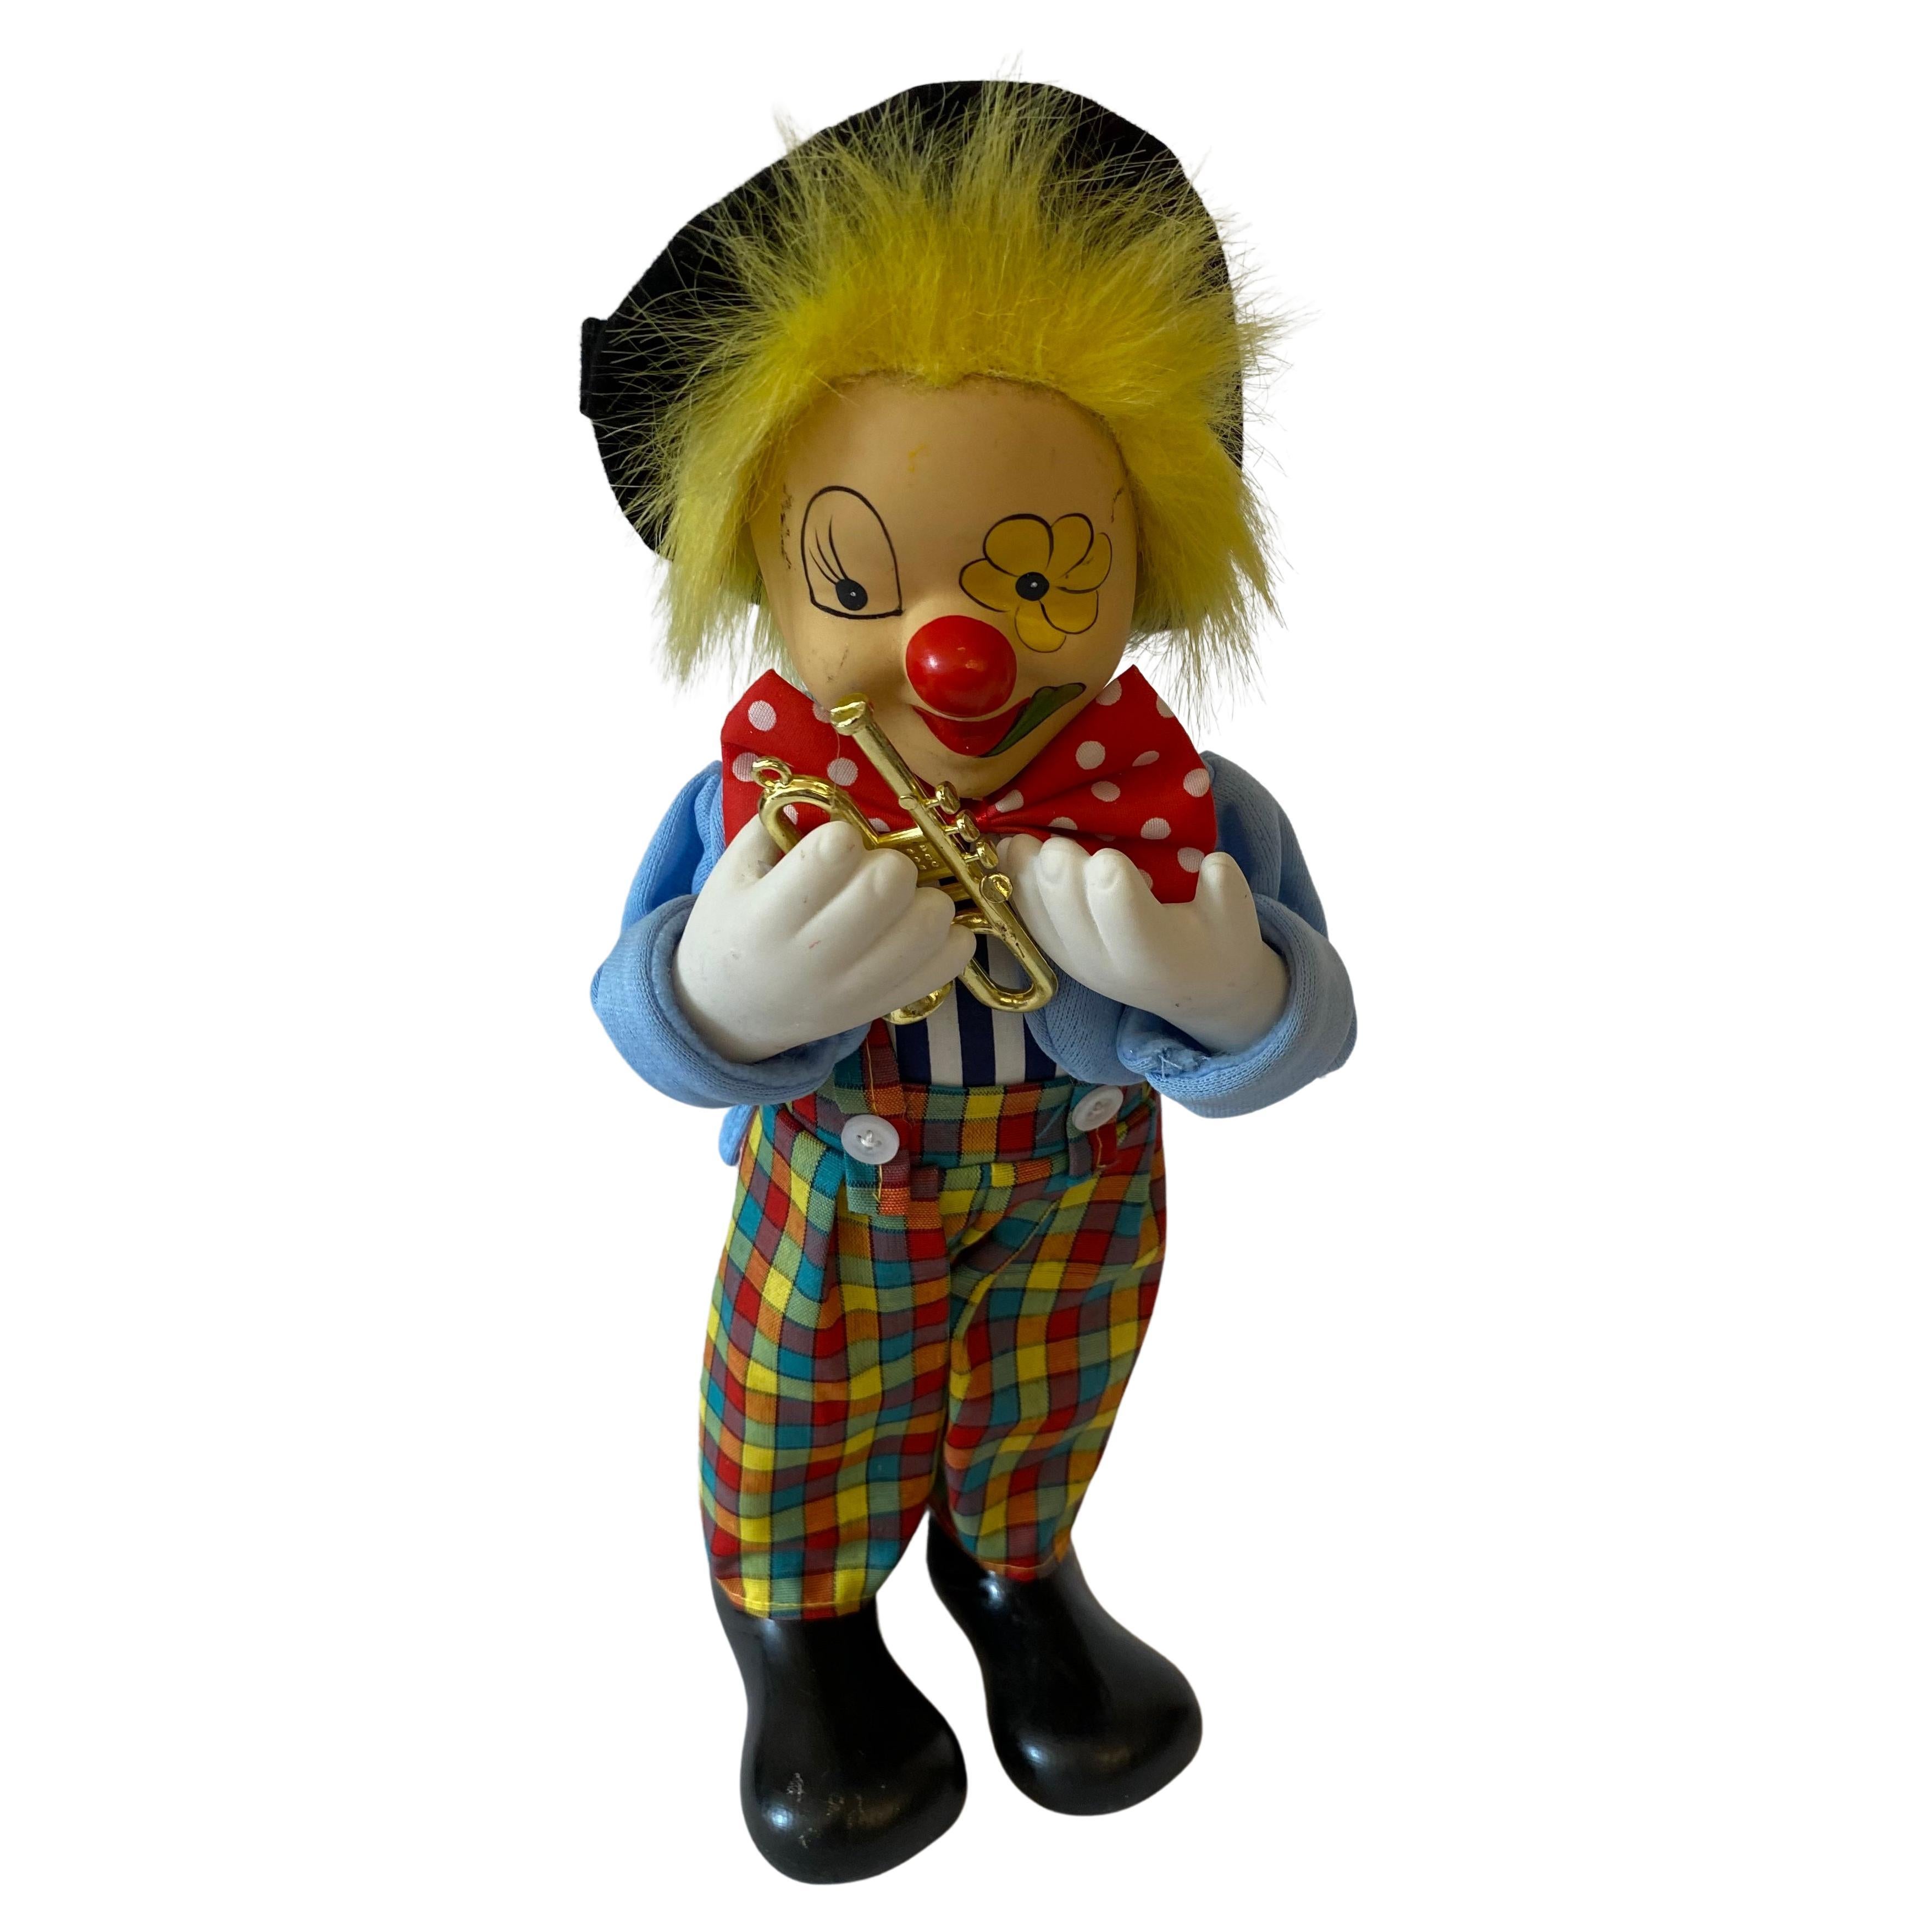 Adorable and Therapeutic Musical Clown Automaton Figure/Toy Musical Instrument